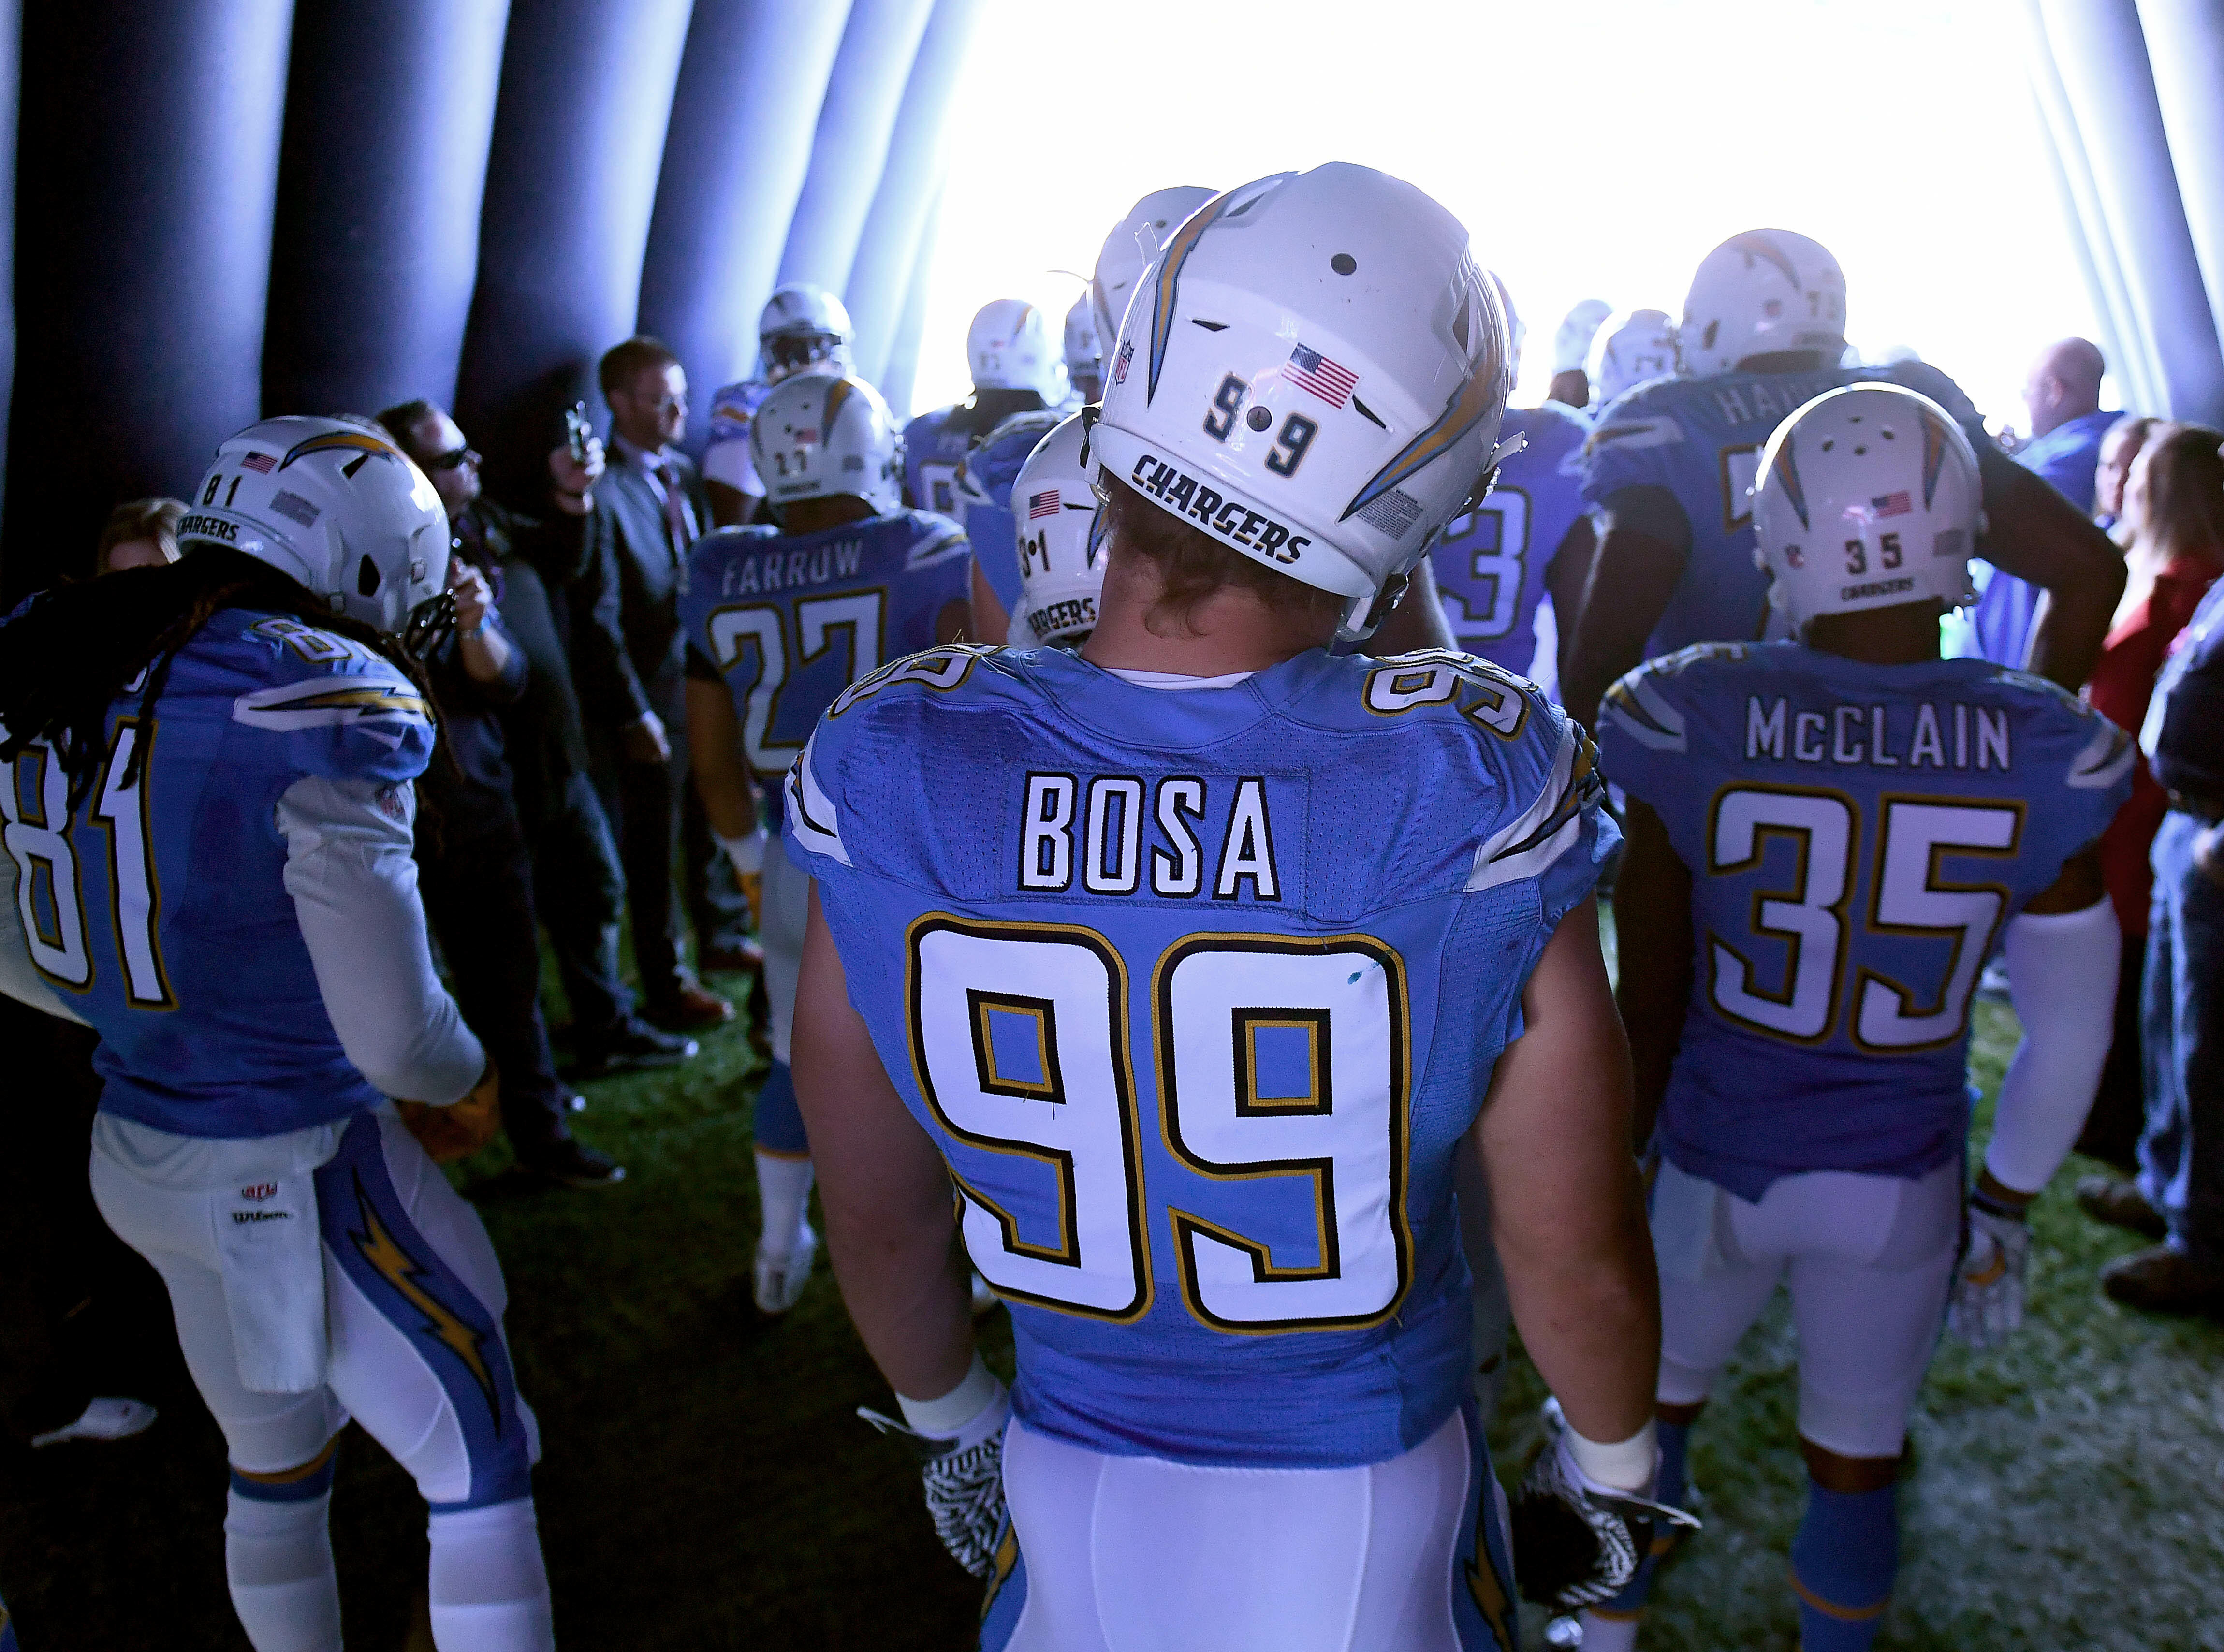 SAN DIEGO, CA - DECEMBER 18: Joey Bosa #99 of the San Diego Chargers prepares to enter the field against the Oakland Raiders at Qualcomm Stadium on December 18, 2016 in San Diego, California. (Photo by Donald Miralle/Getty Images)